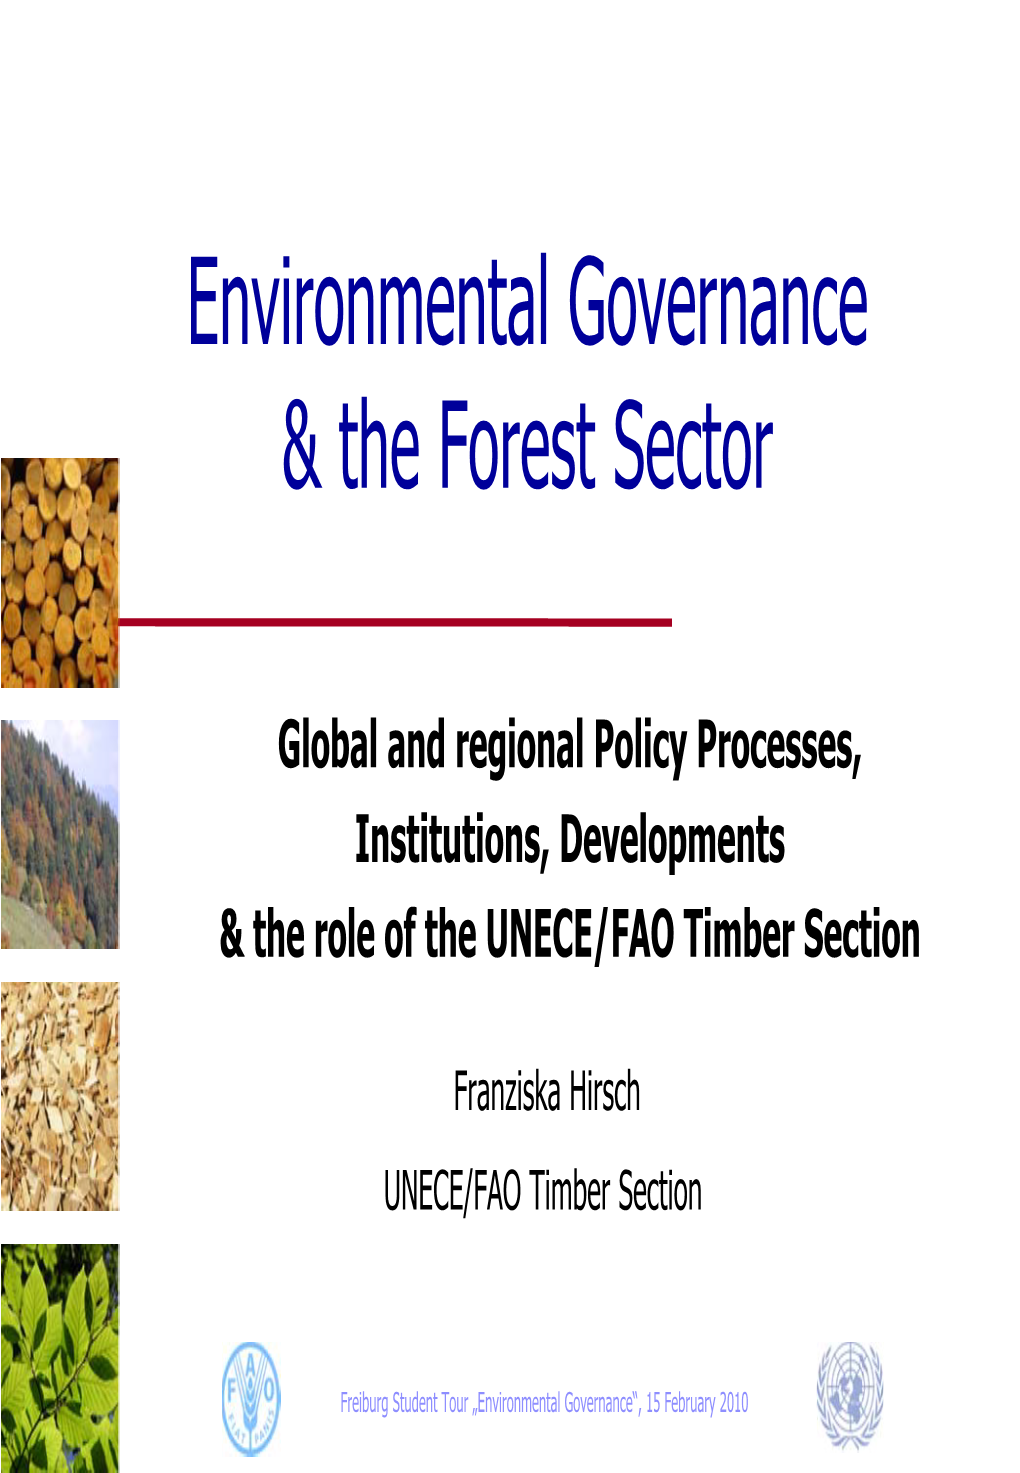 Environmental Governance & the Forest Sector